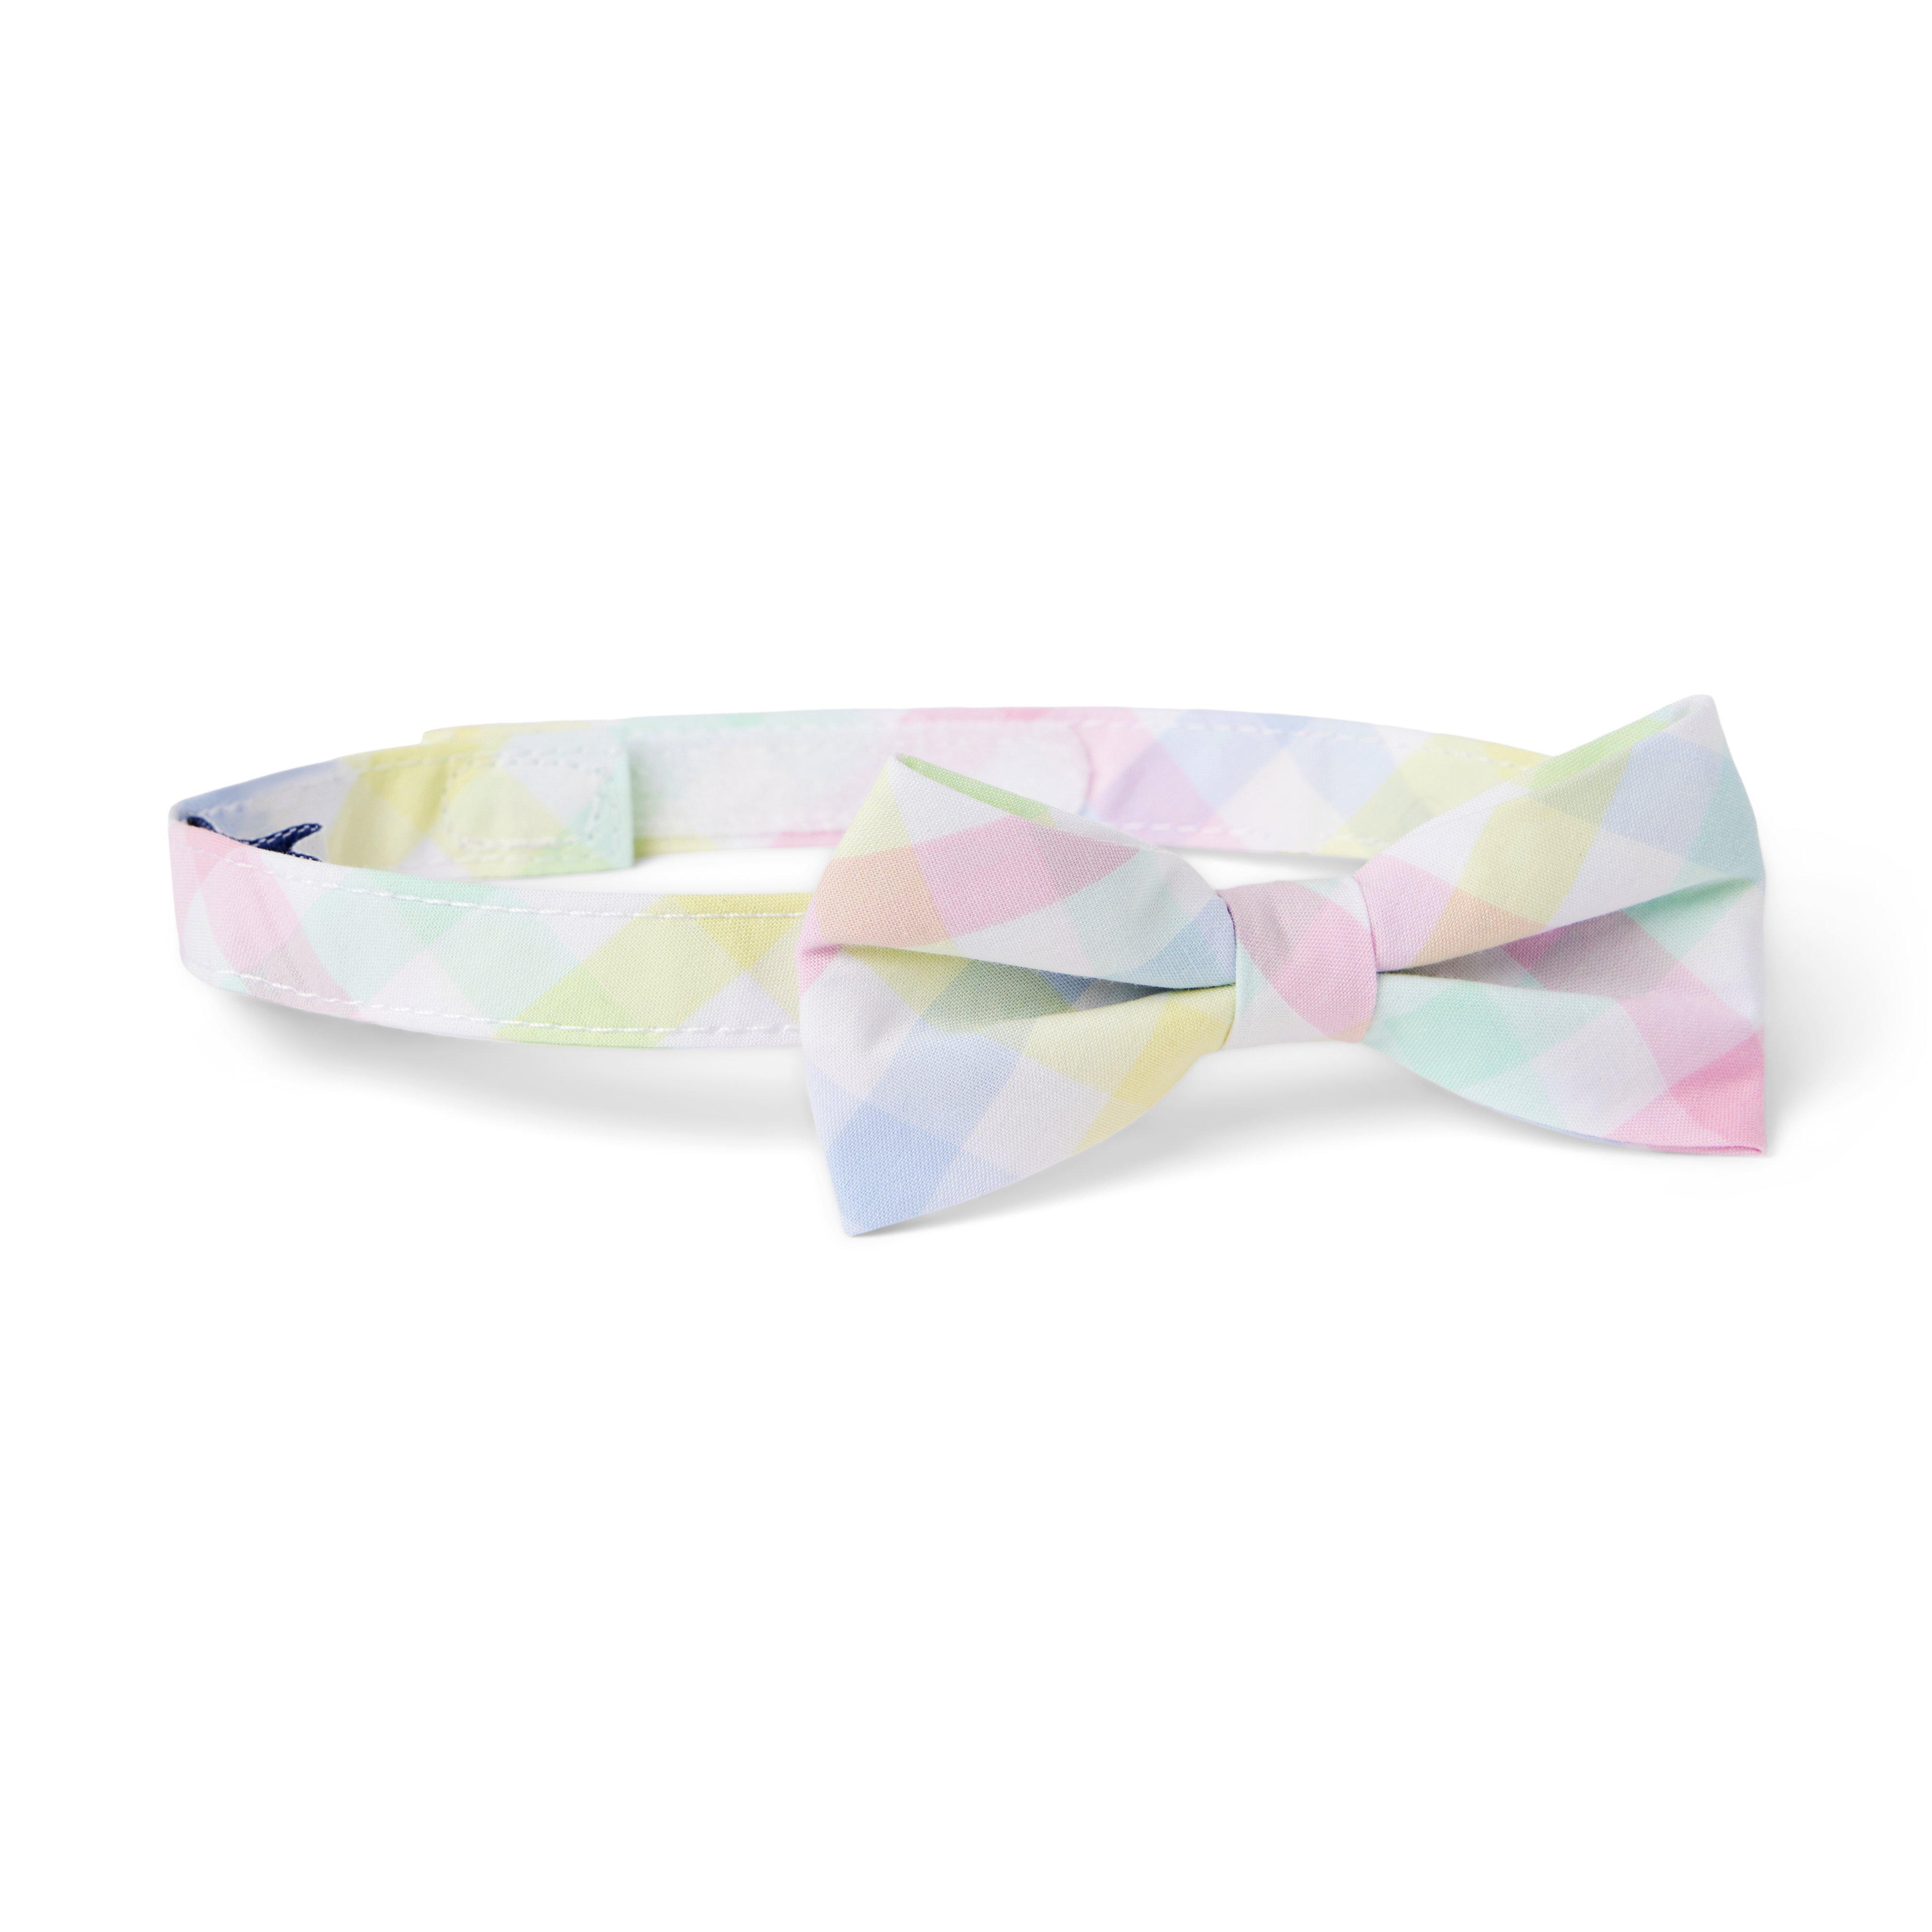 Gingham Bowtie image number 0